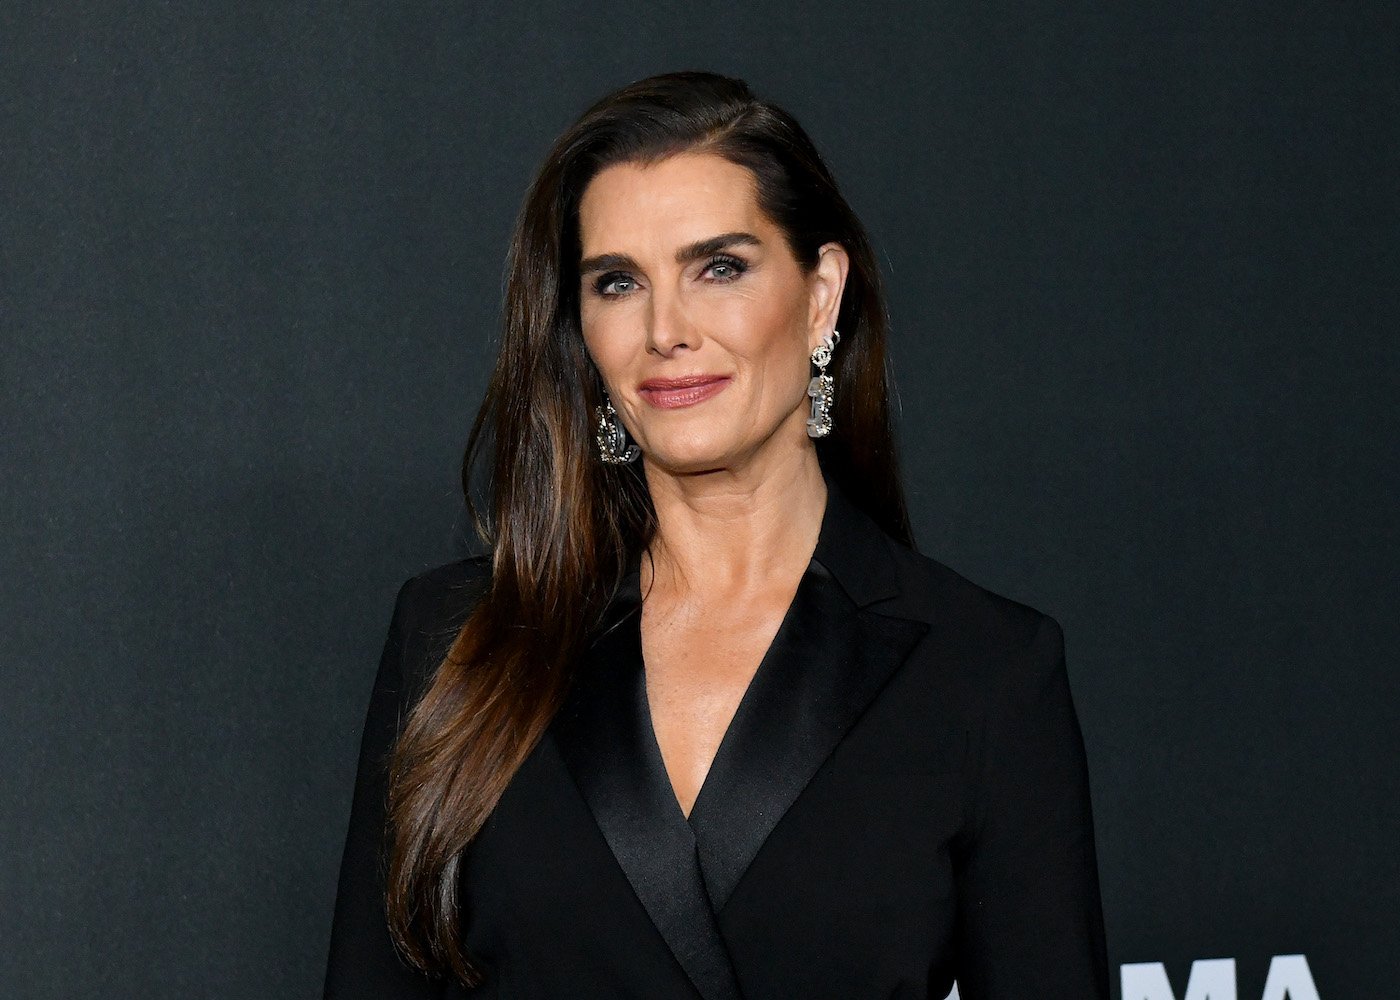 Brooke Shields attends MoMA's 12th-annual Film Benefit Presented by Chanel Honoring Laura Dern in November 2019, in New York City